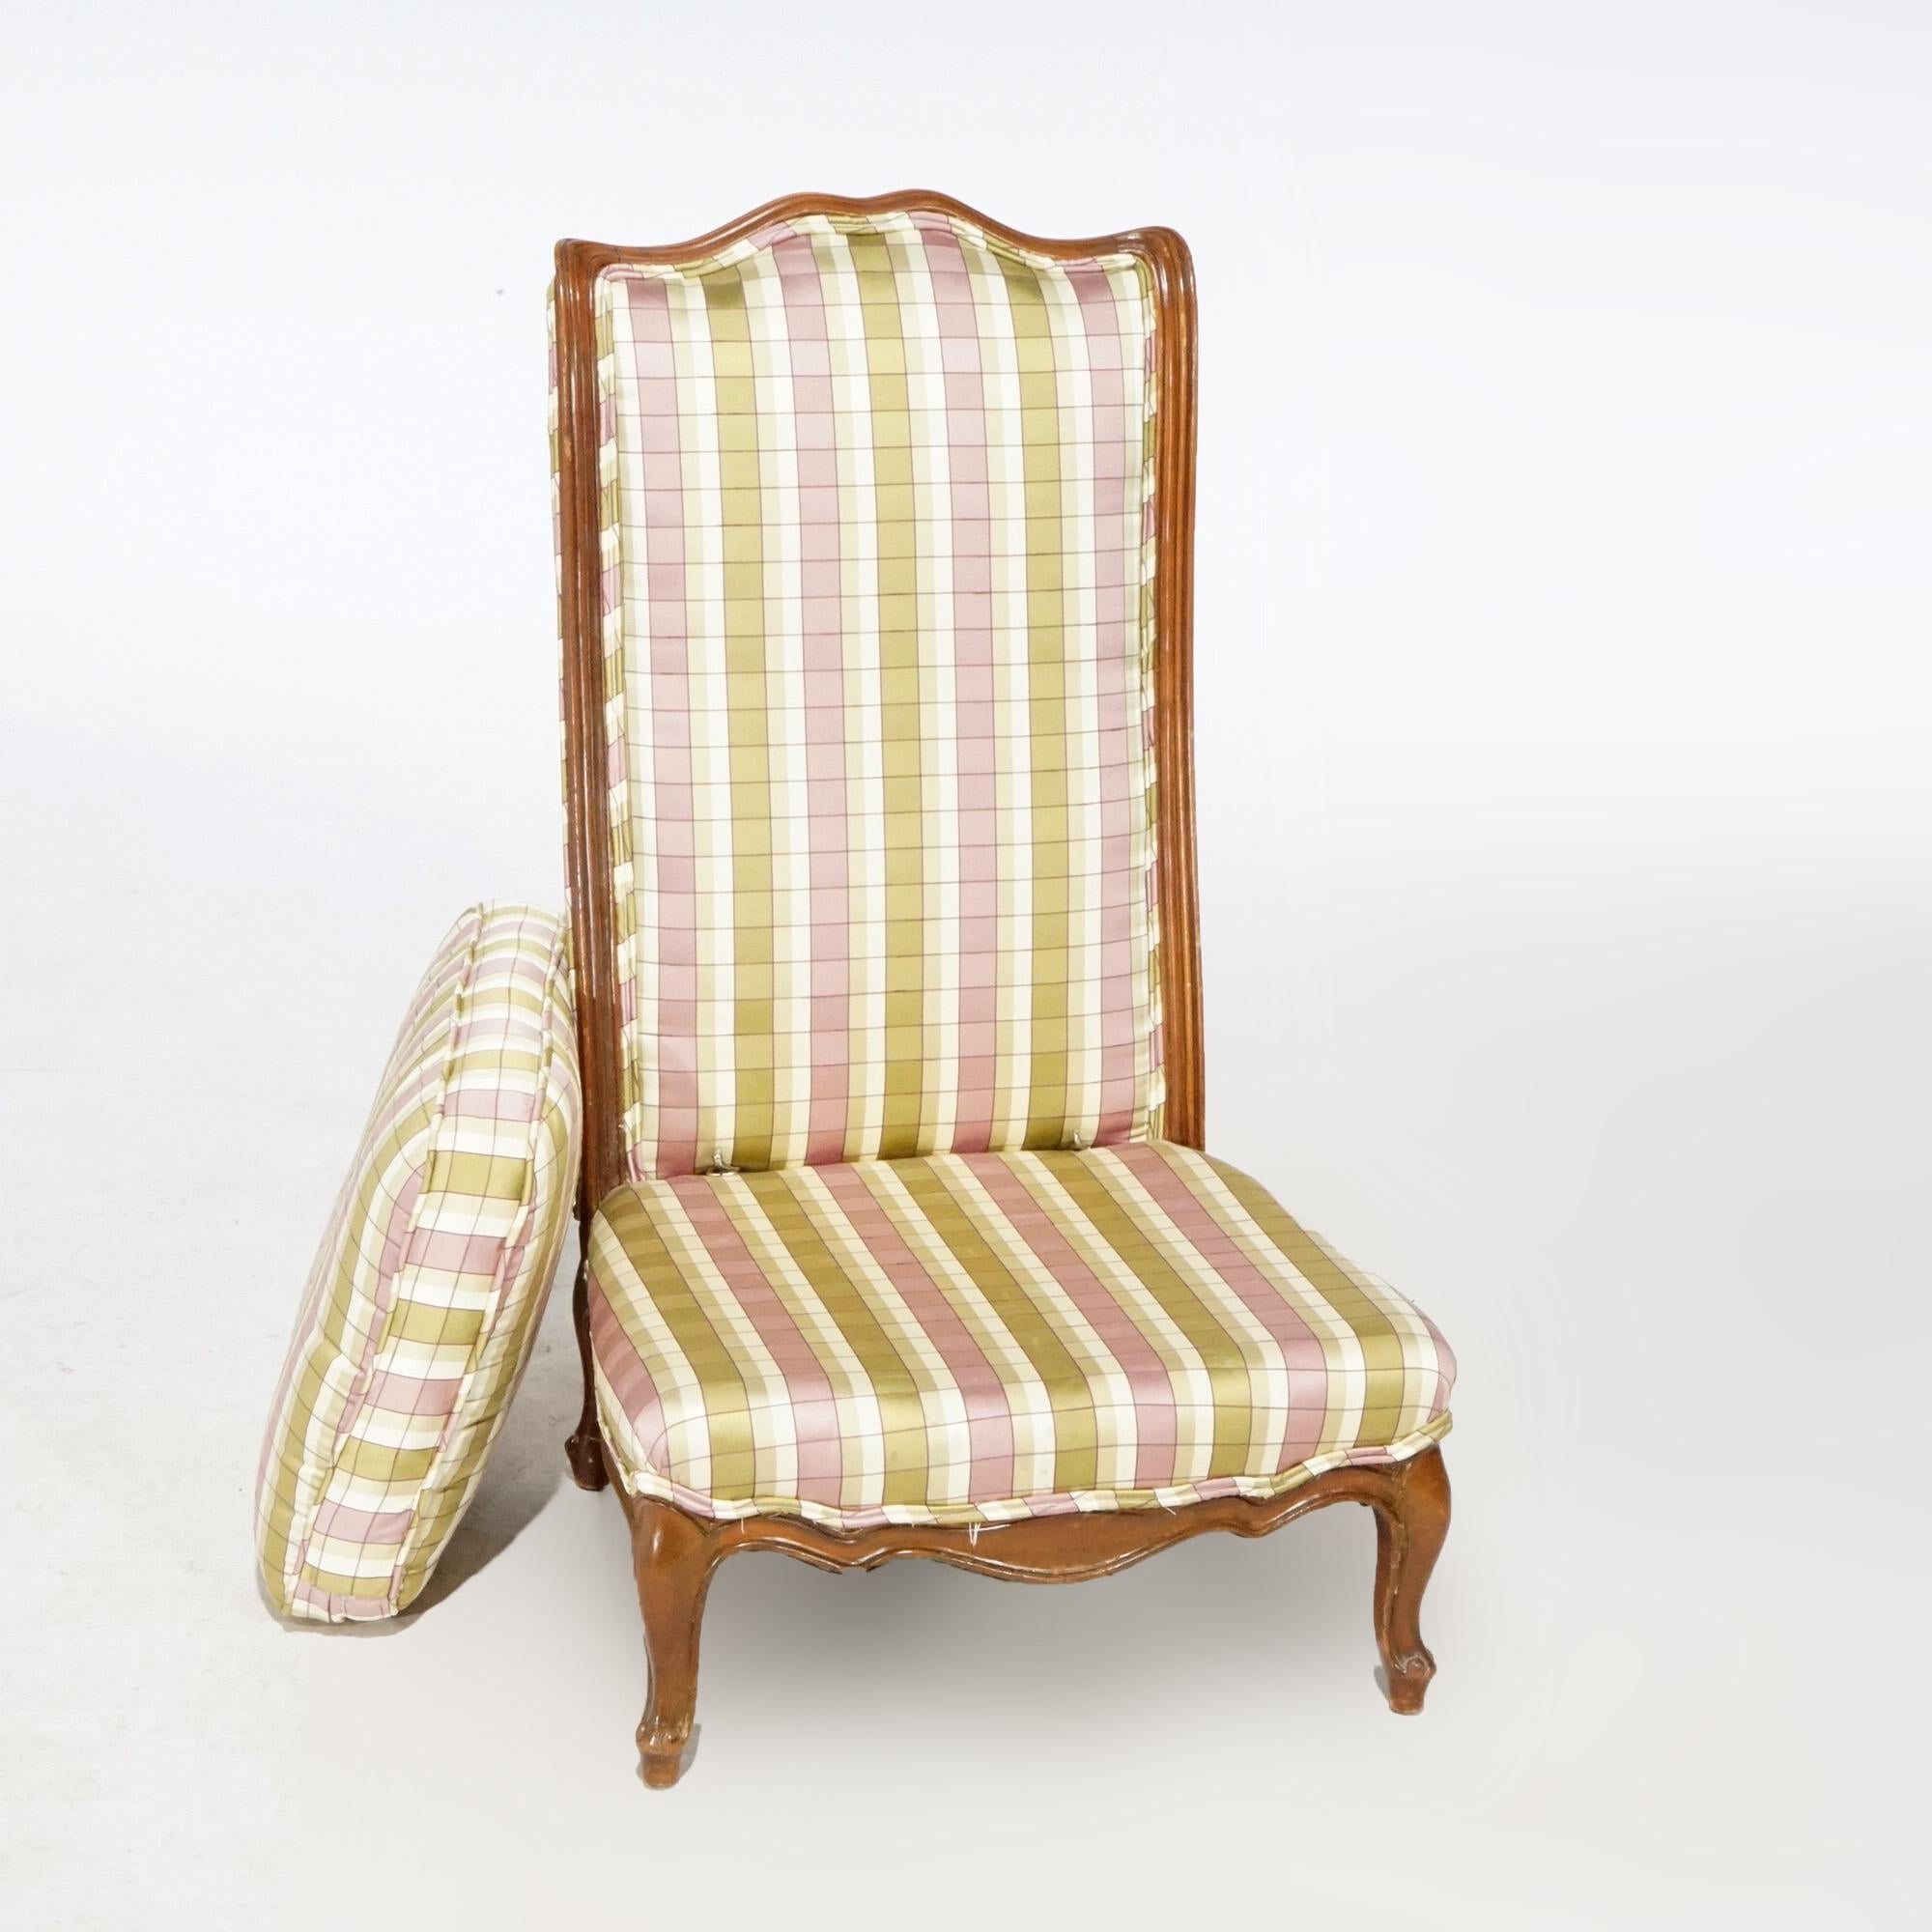 A vintage French style upholstered ladies slipper chair offers shaped back raised on cabriole legs, 20th century

Measures- 32.5''H x 20''W x 23''D.